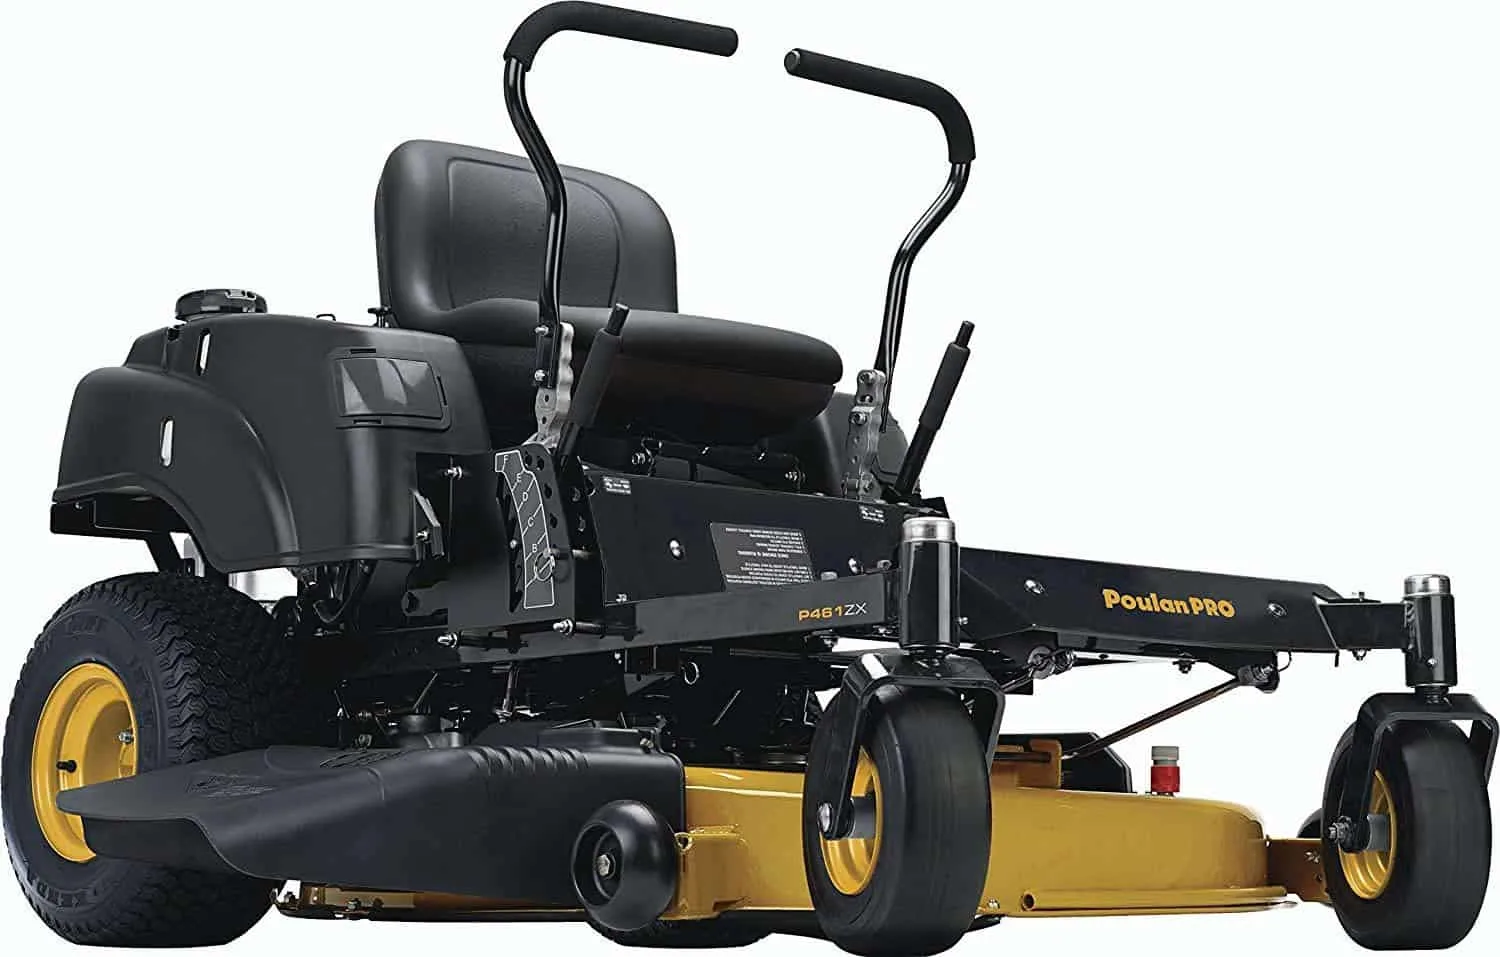 Poulan Pro Zero Turn Riding Mower - Best Lawn Tractor for Hills